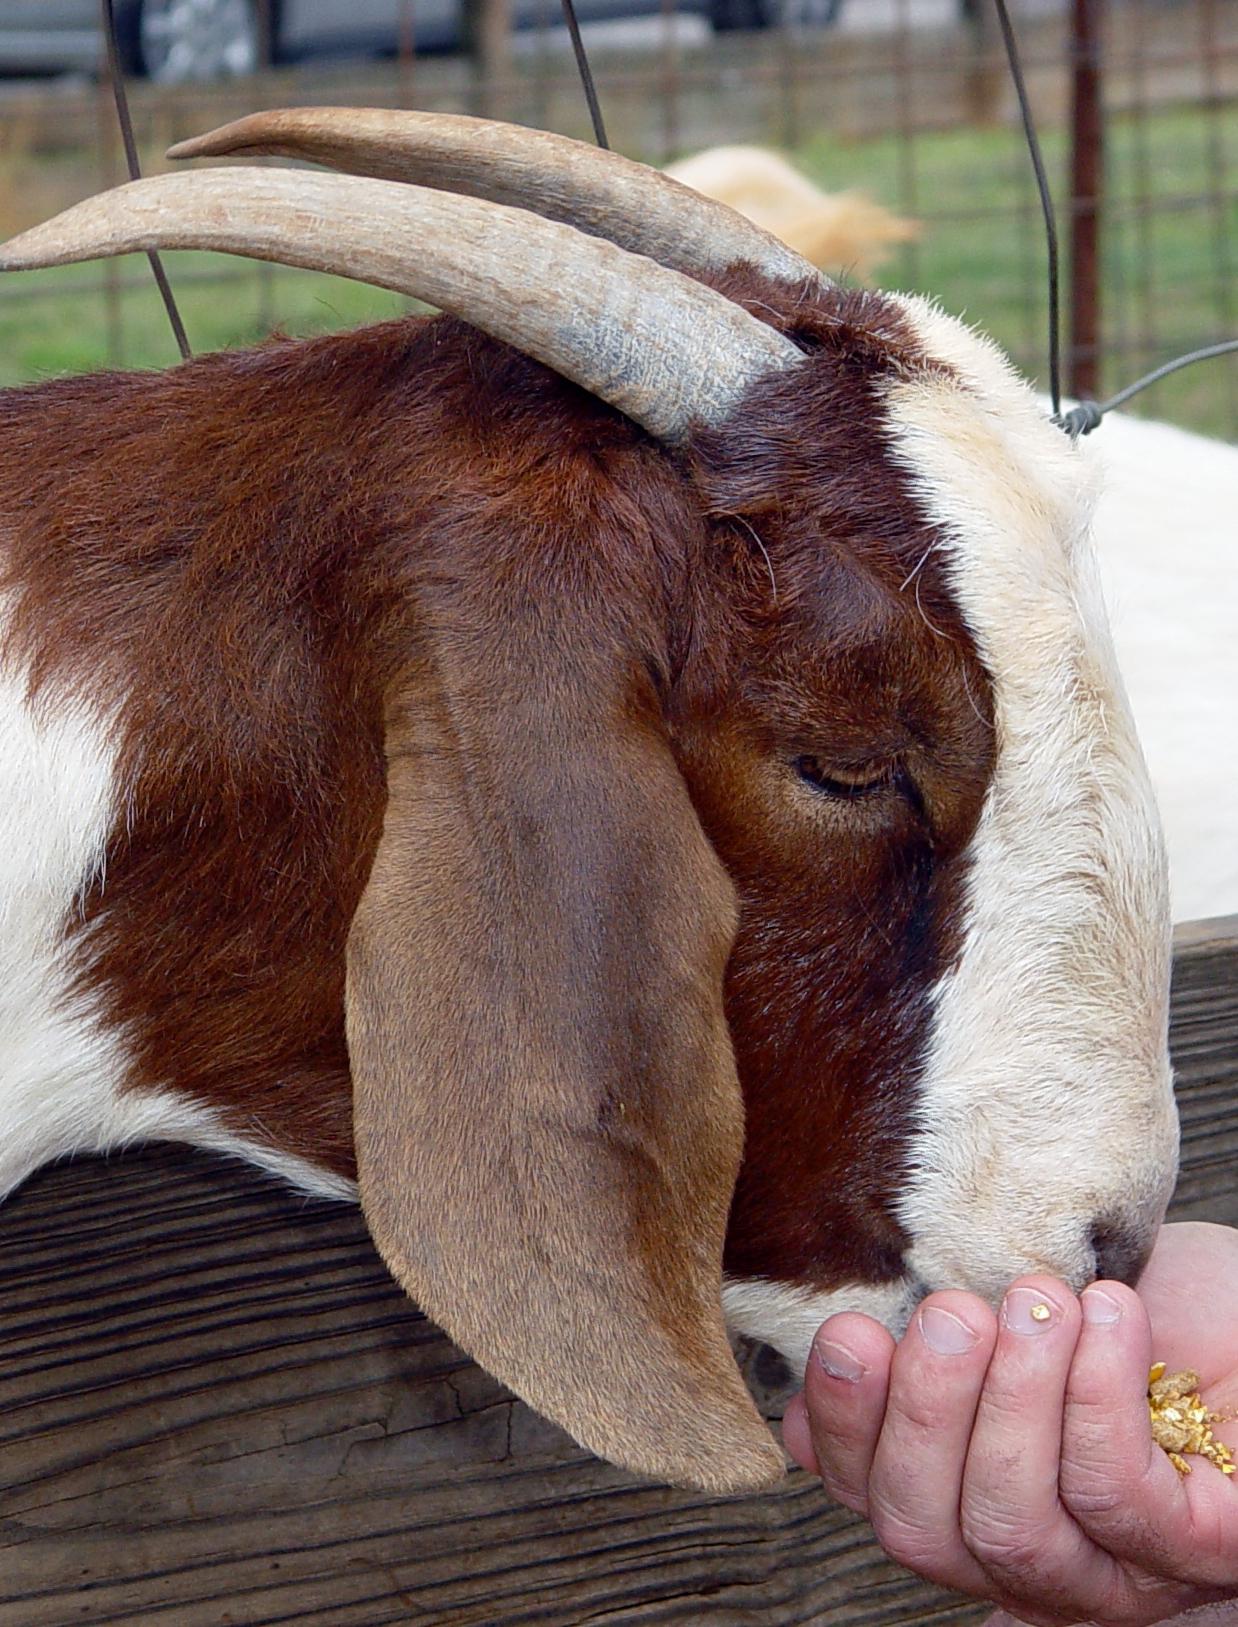 A brown and white goat eats grain from a persons hand.